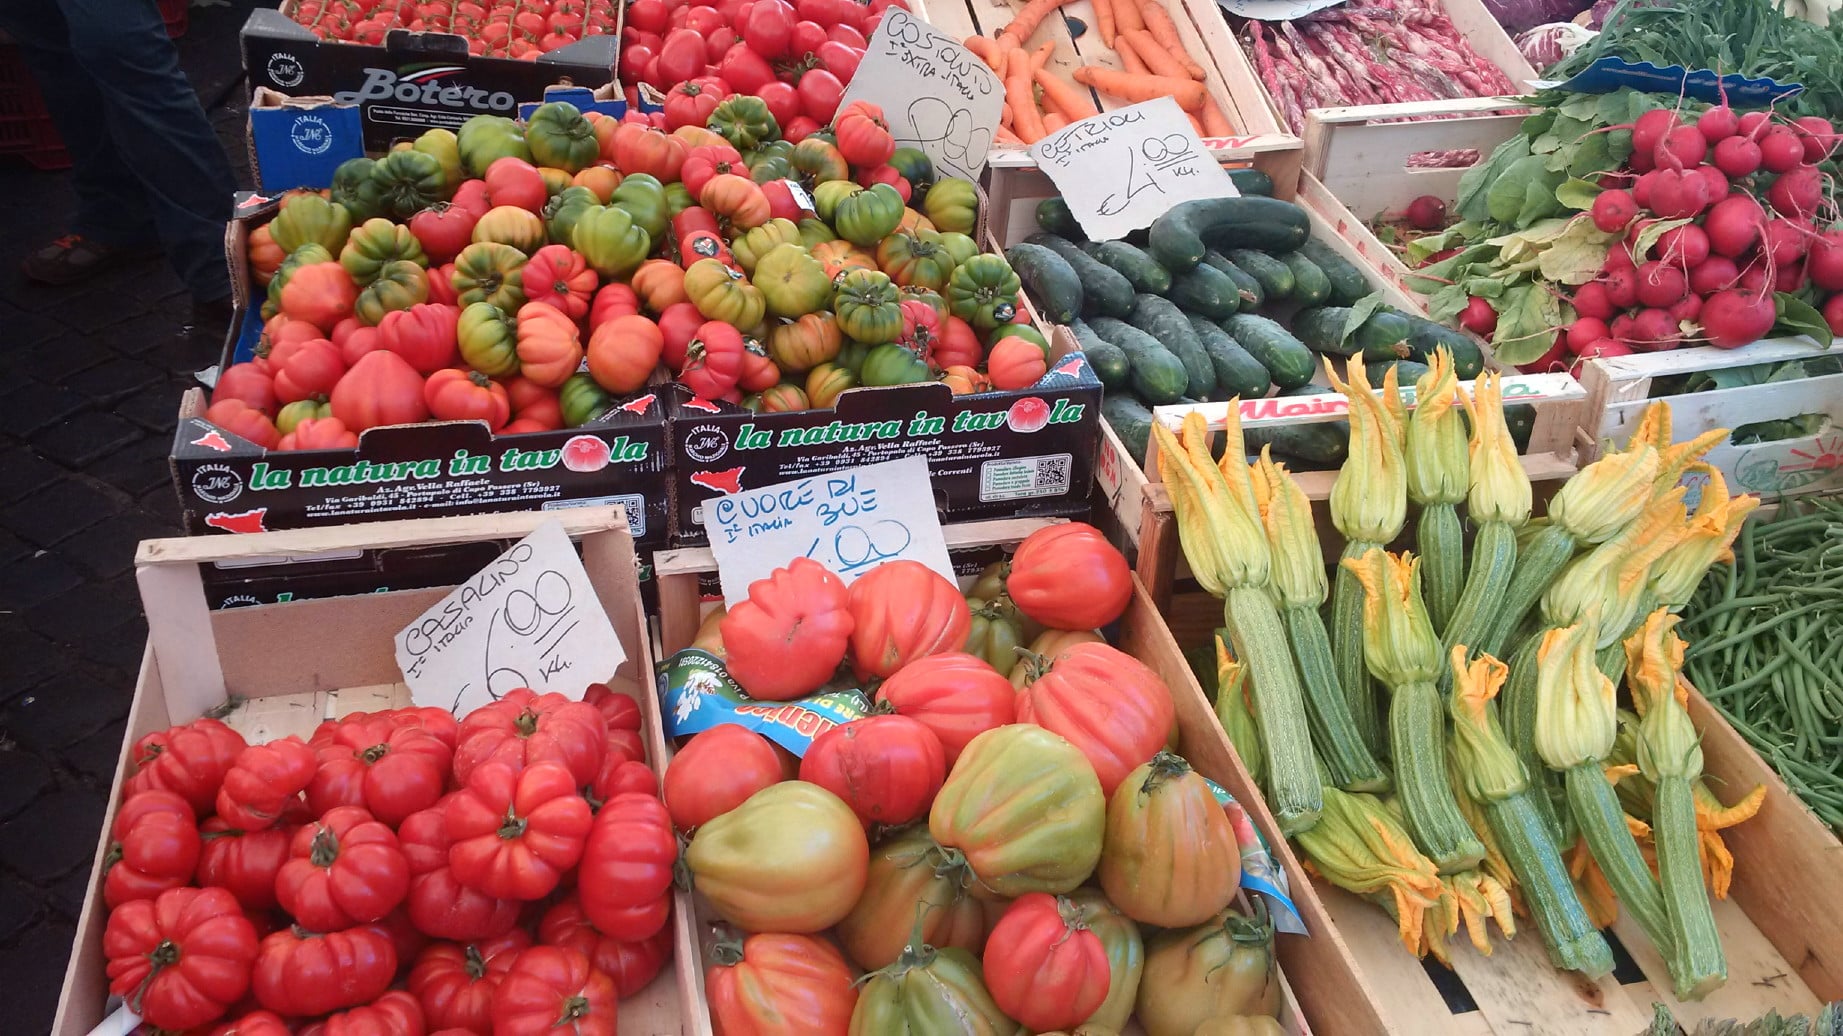 Tomatoes Costuto at Farmers market Rome